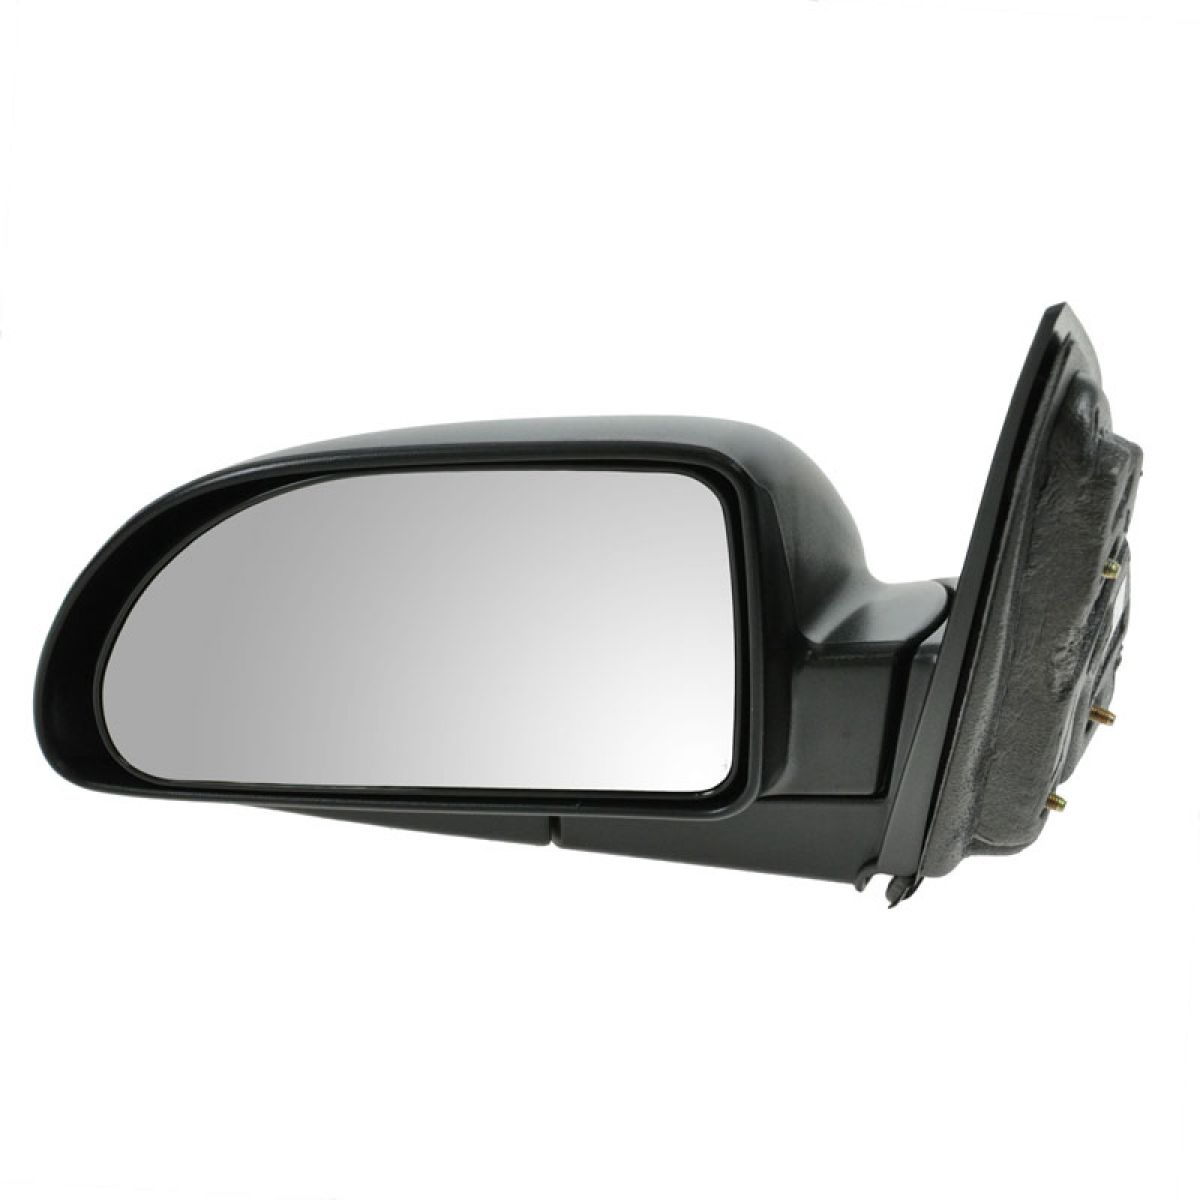 Details About Manual Side View Door Mirror Driver Left Lh For Chevy Equinox Saturn Vue